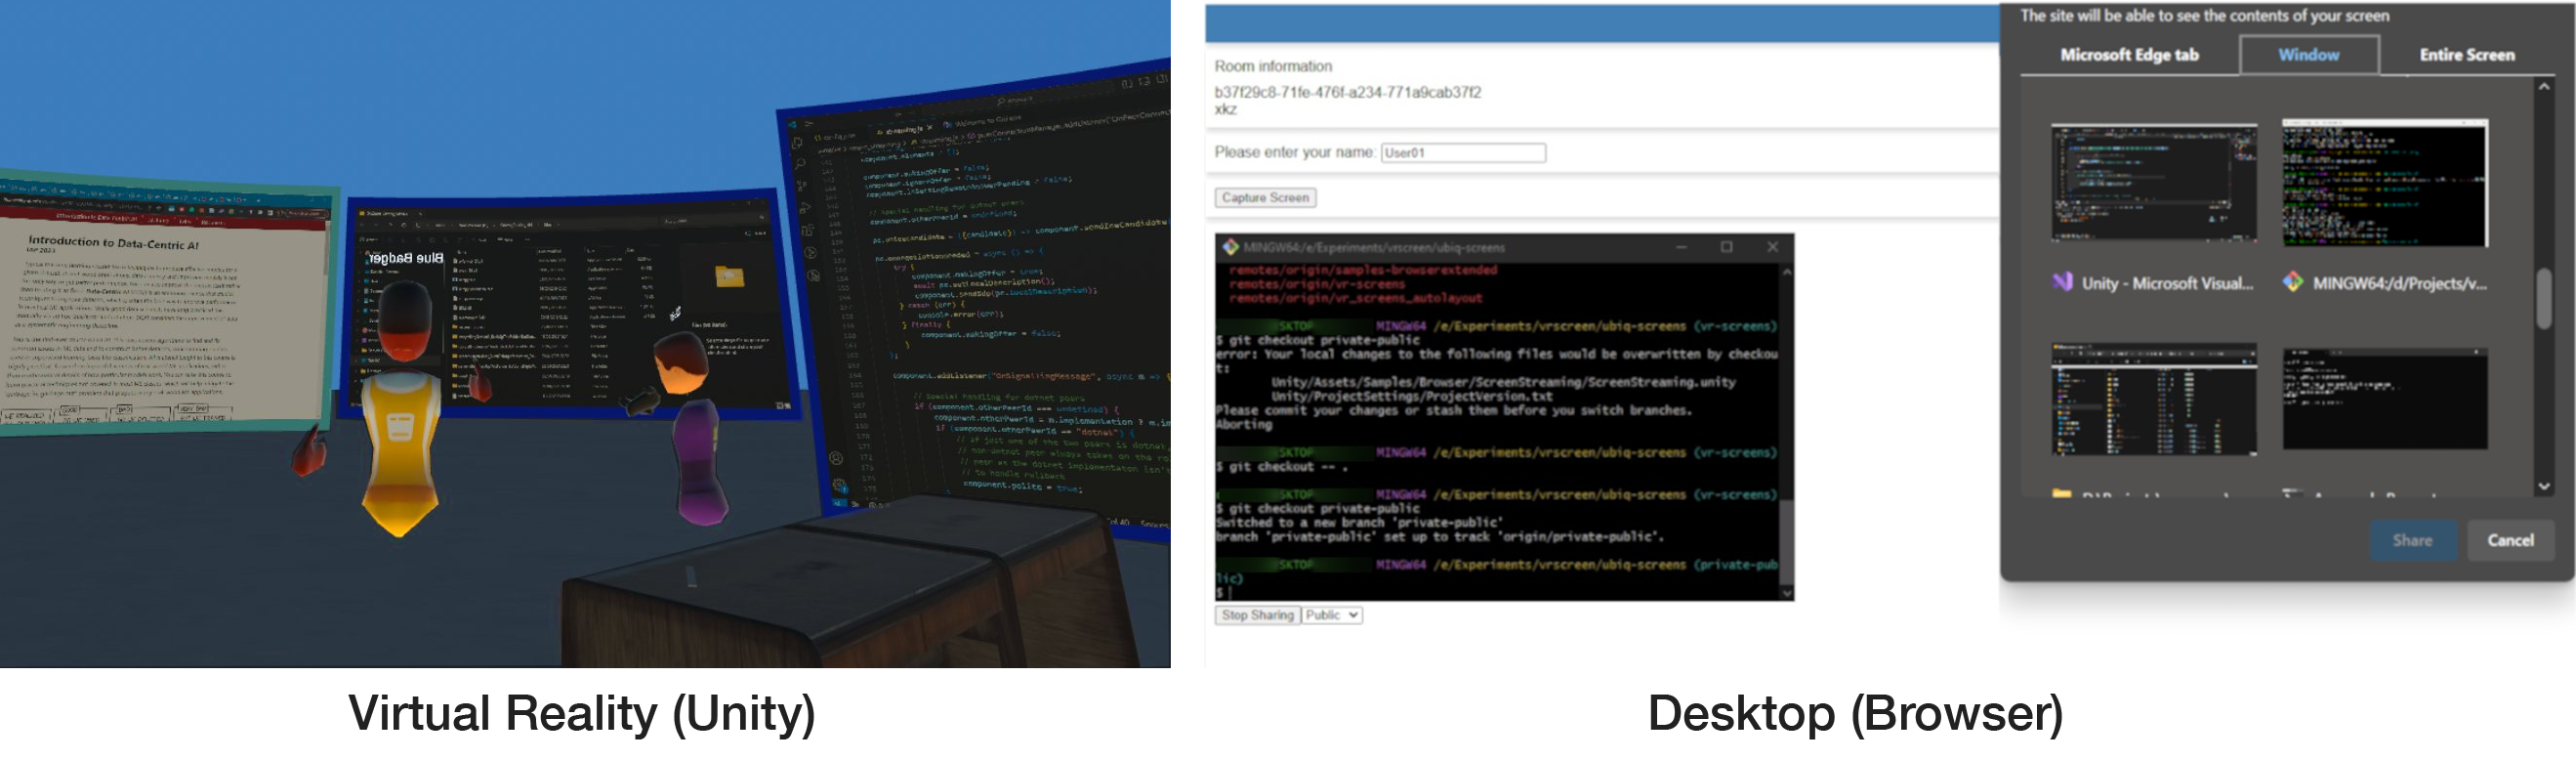 Overview of StreamSpace. Left: Collaborative virtual environment with streamed windows in Unity. Right: Browser interface with window capture prompt and privacy settings.